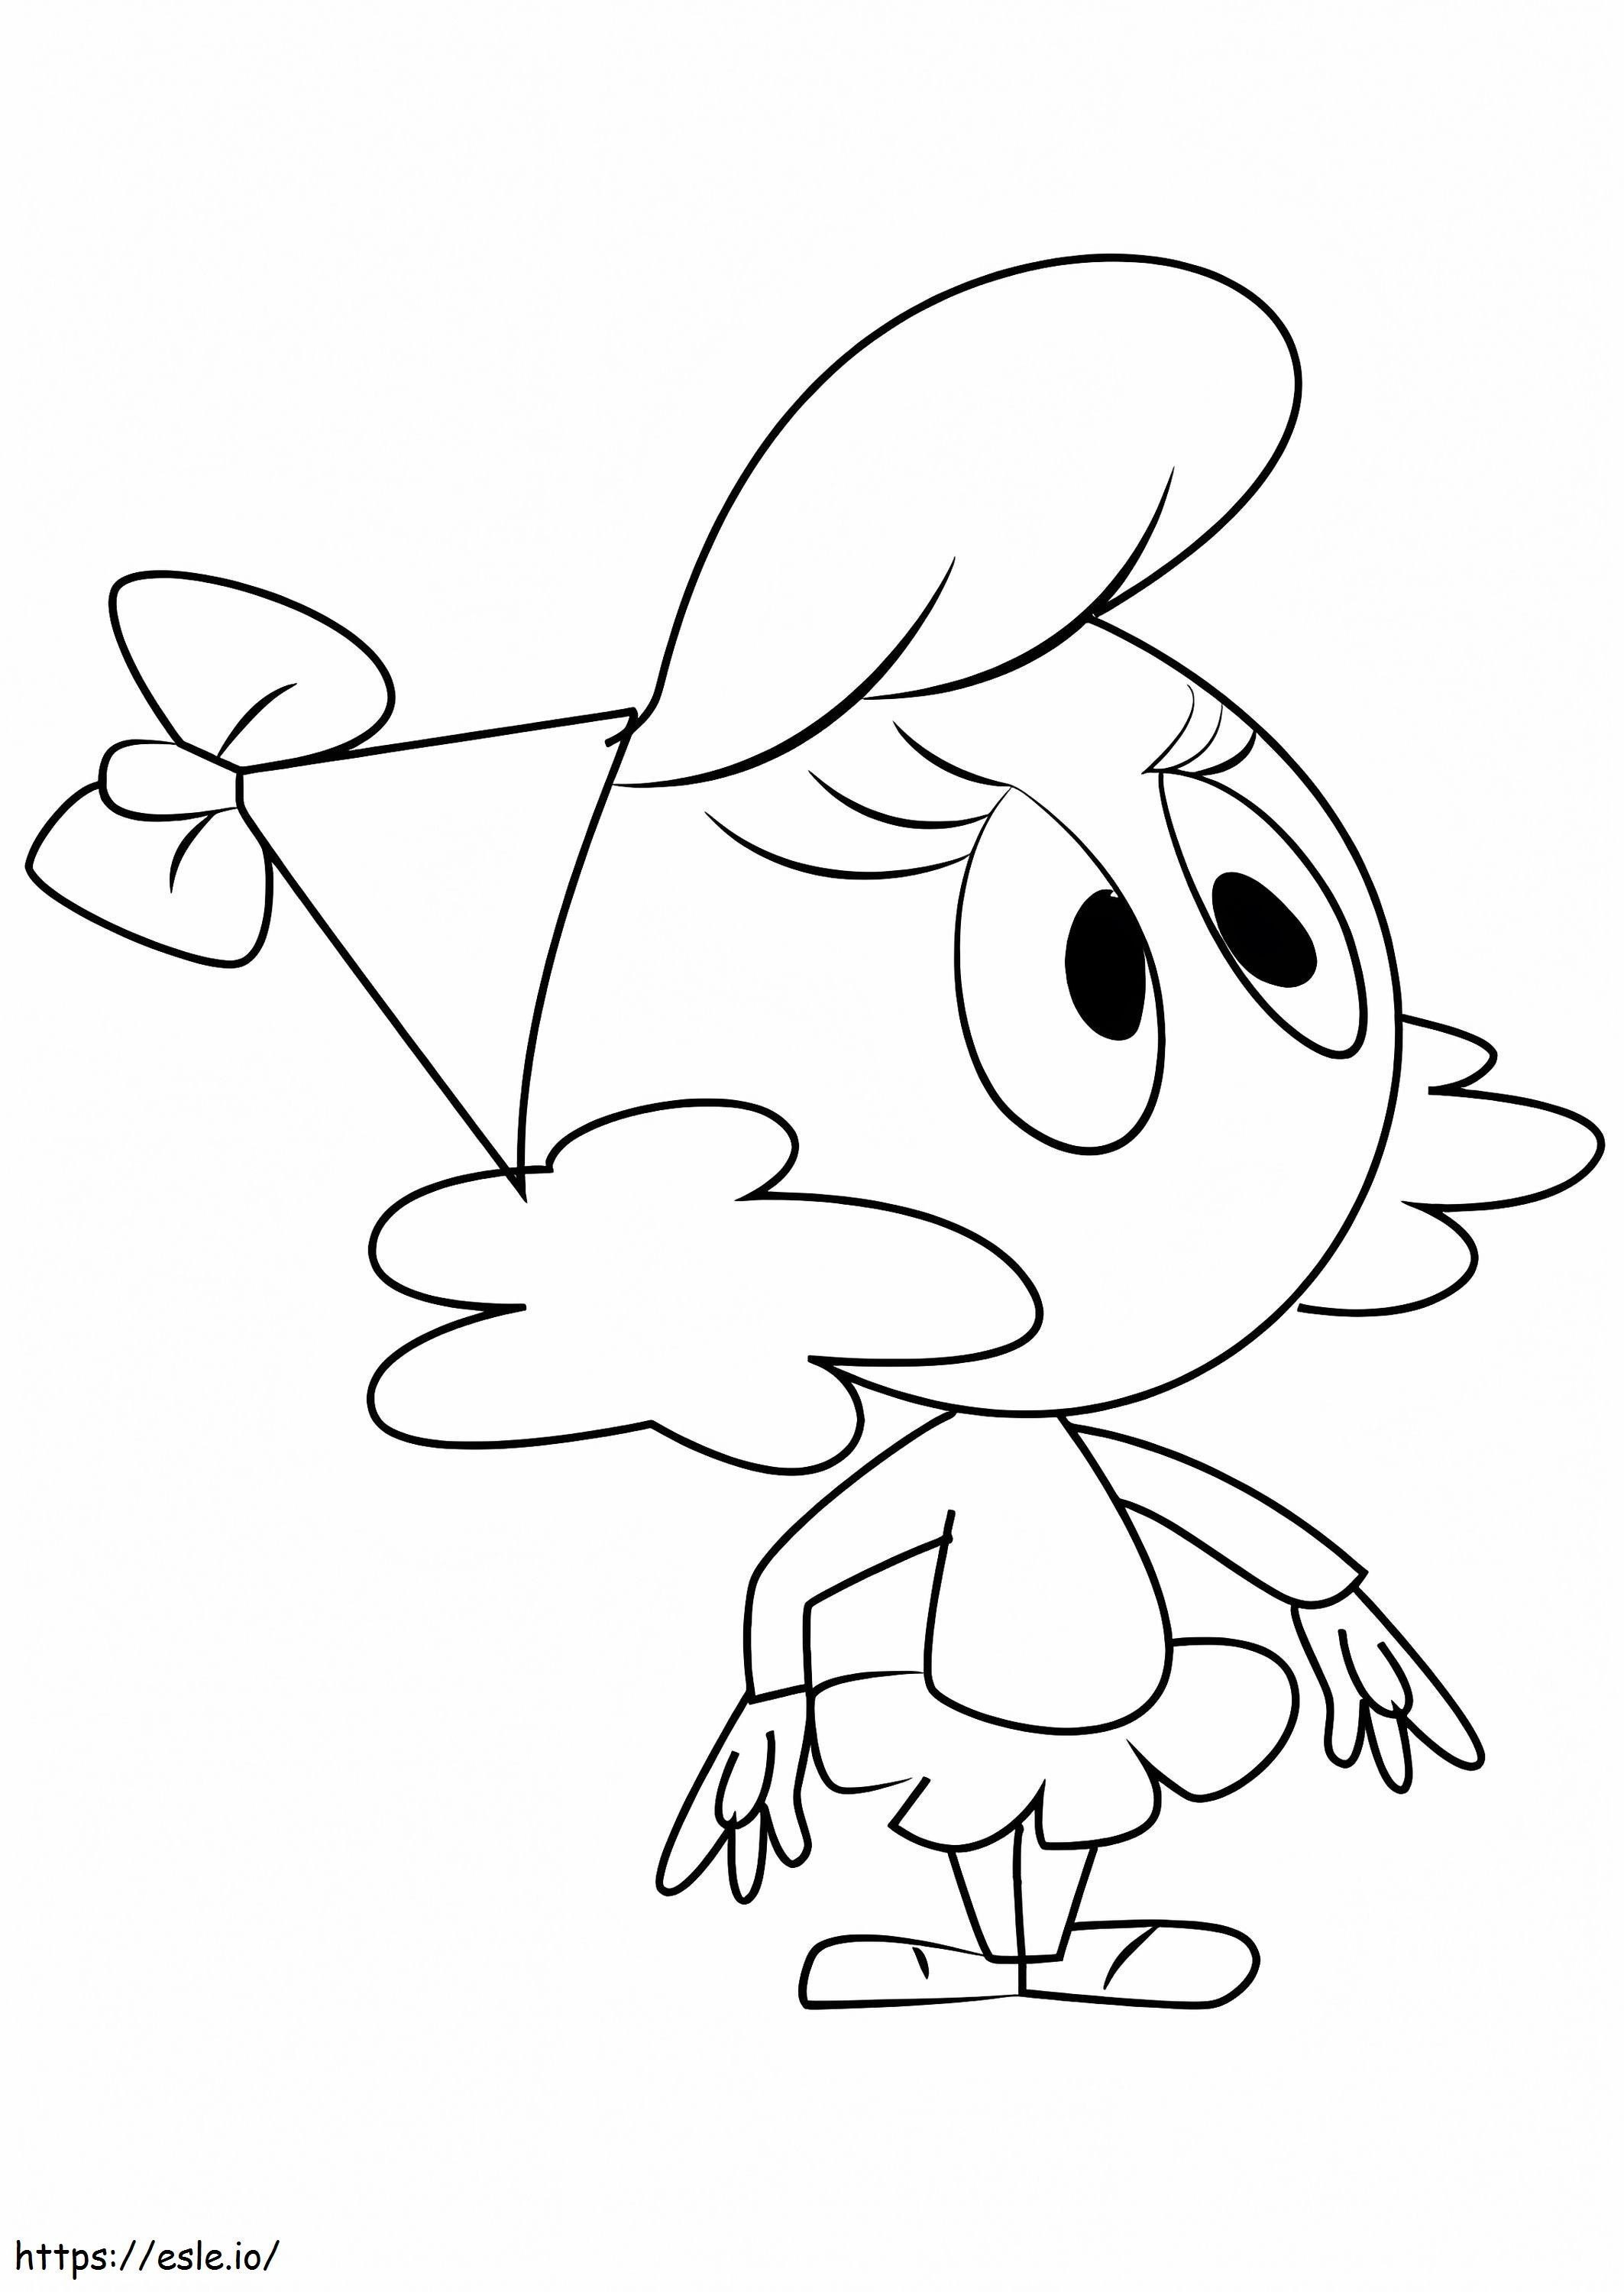 Marcia The Martian coloring page